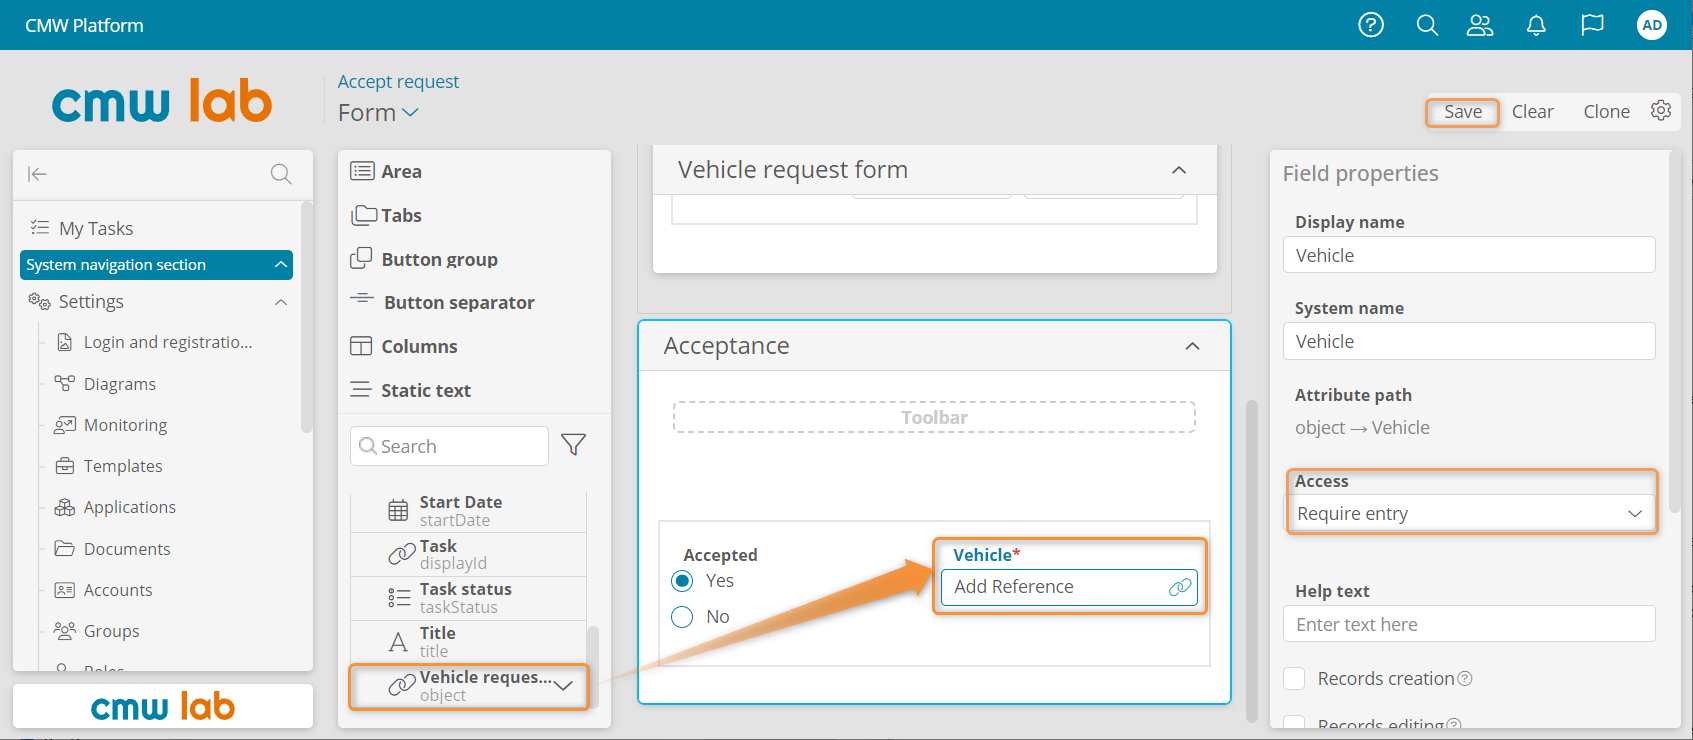 Adding the Vehicle dropdown to the Accept request task form